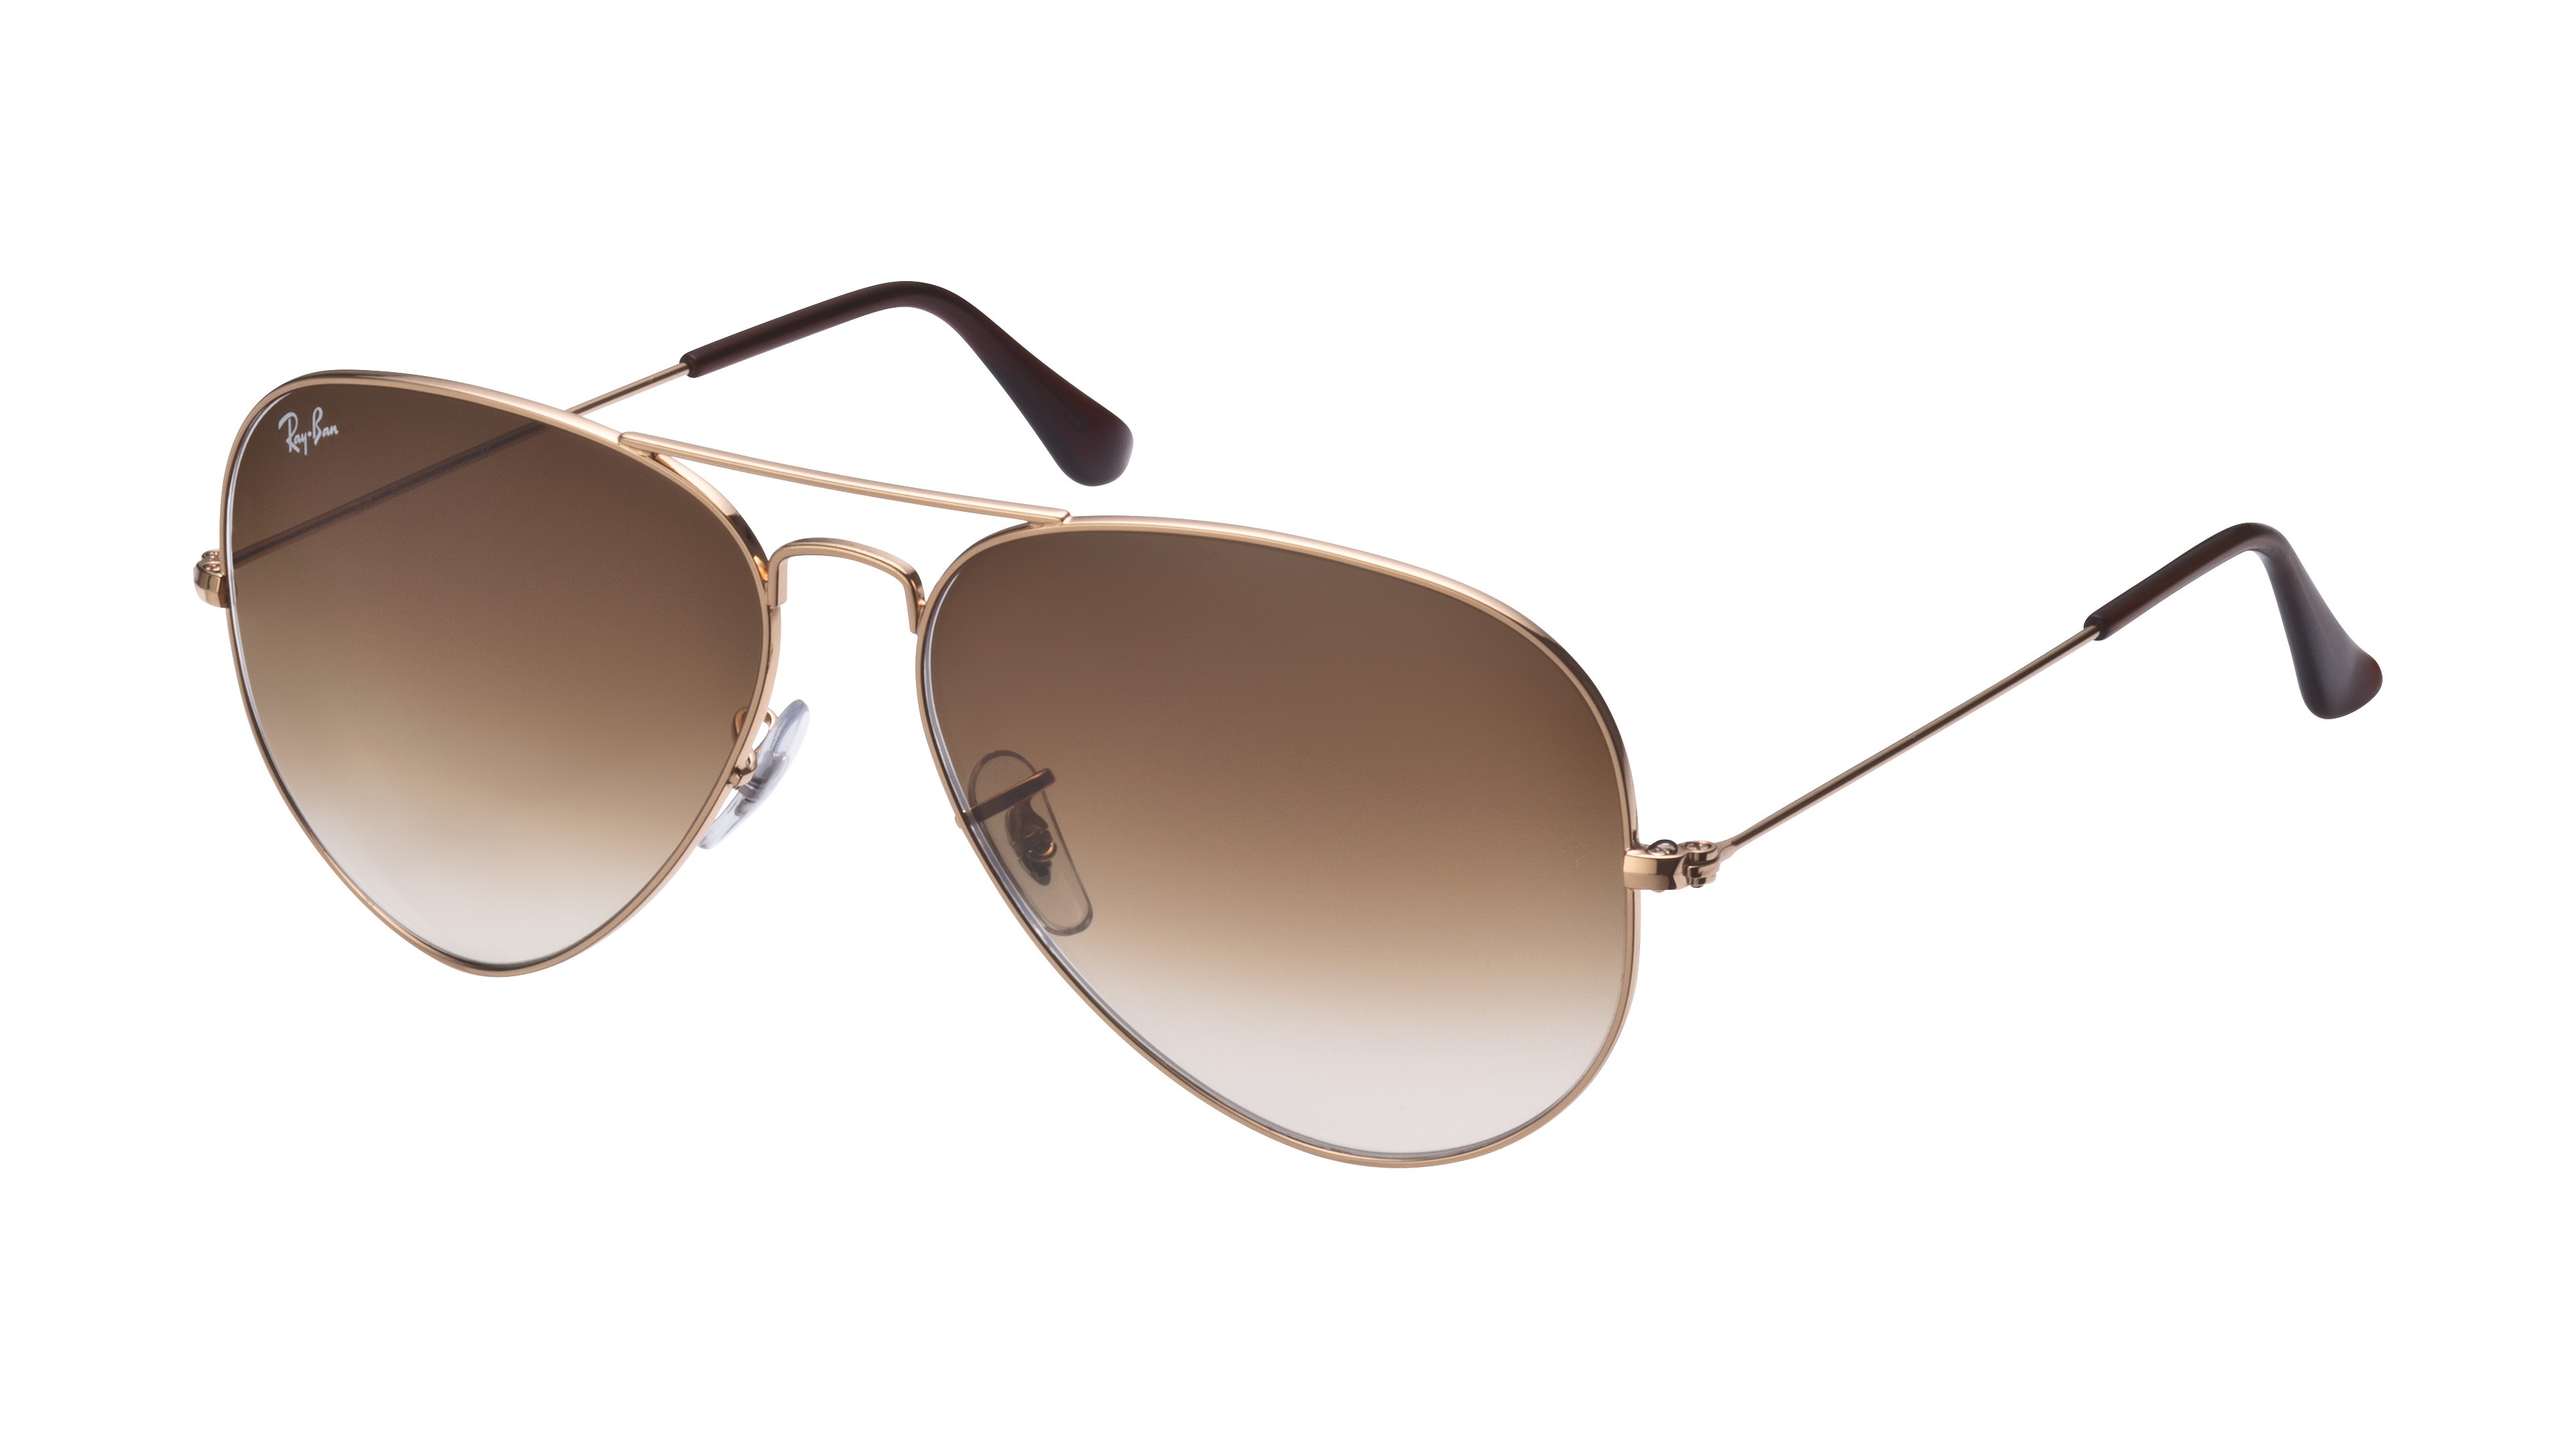 [products.image.angle_left01] Ray-Ban AVIATOR LARGE METAL 0RB3025 001/51 Sonnenbrille